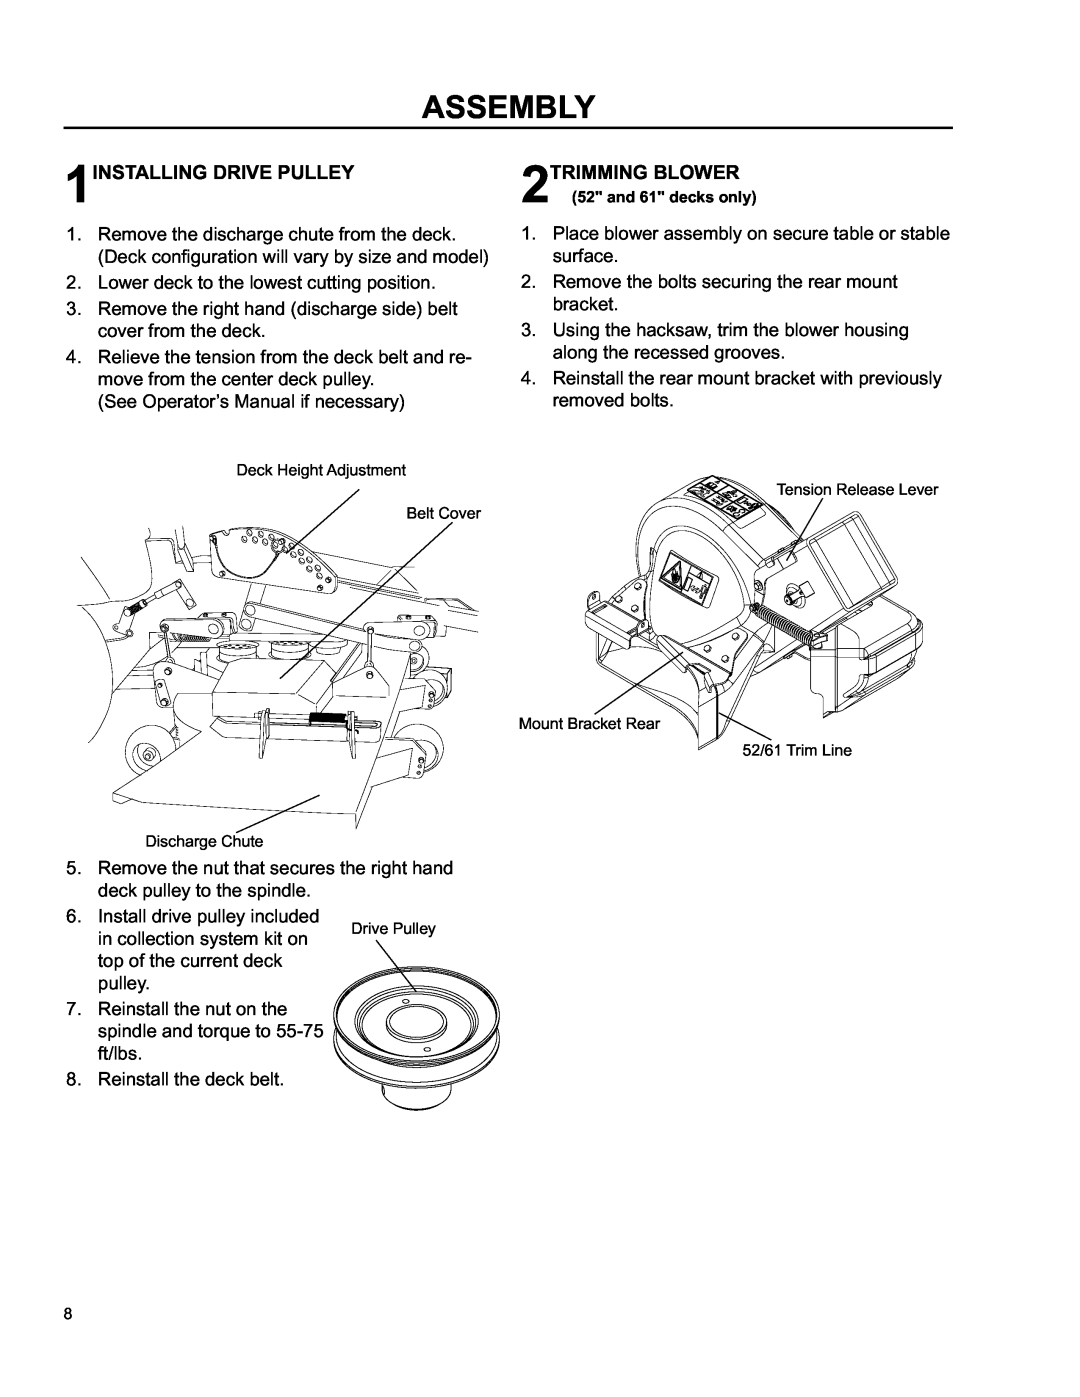 Husqvarna O0803001 manual Assembly, 1INSTALLING DRIVE PULLEY, 2TRIMMING BLOWER 